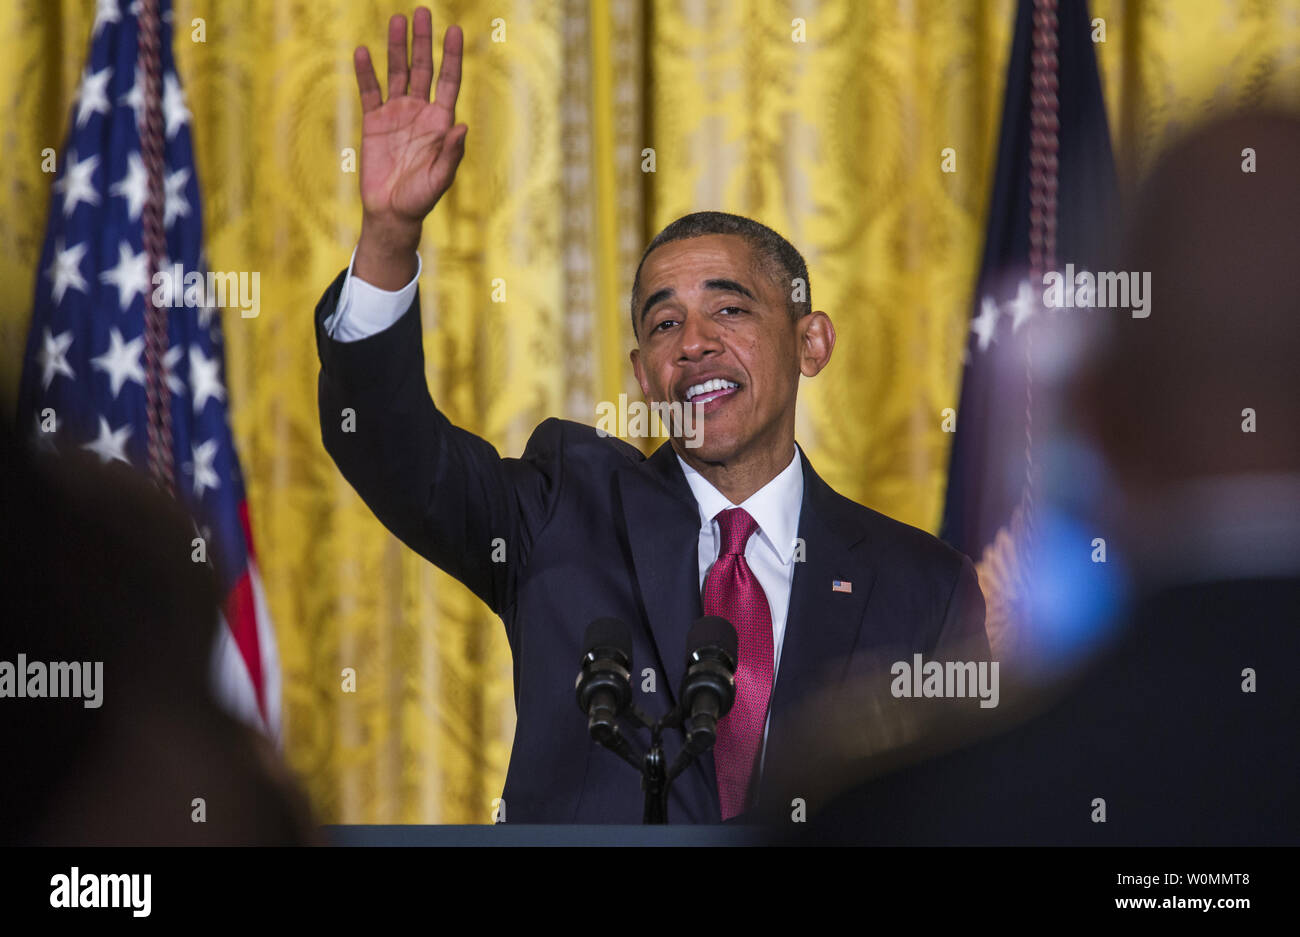 US President Barack Obama waves goodbye after presiding over a naturalization ceremony for active duty service members and civilians in the East Room of the White House in Washington, D.C. on July 4, 2014. The President plans to use executive actions to circumvent congress and move ahead with immigration reform.   UPI/Jim Lo Scalzo Stock Photo